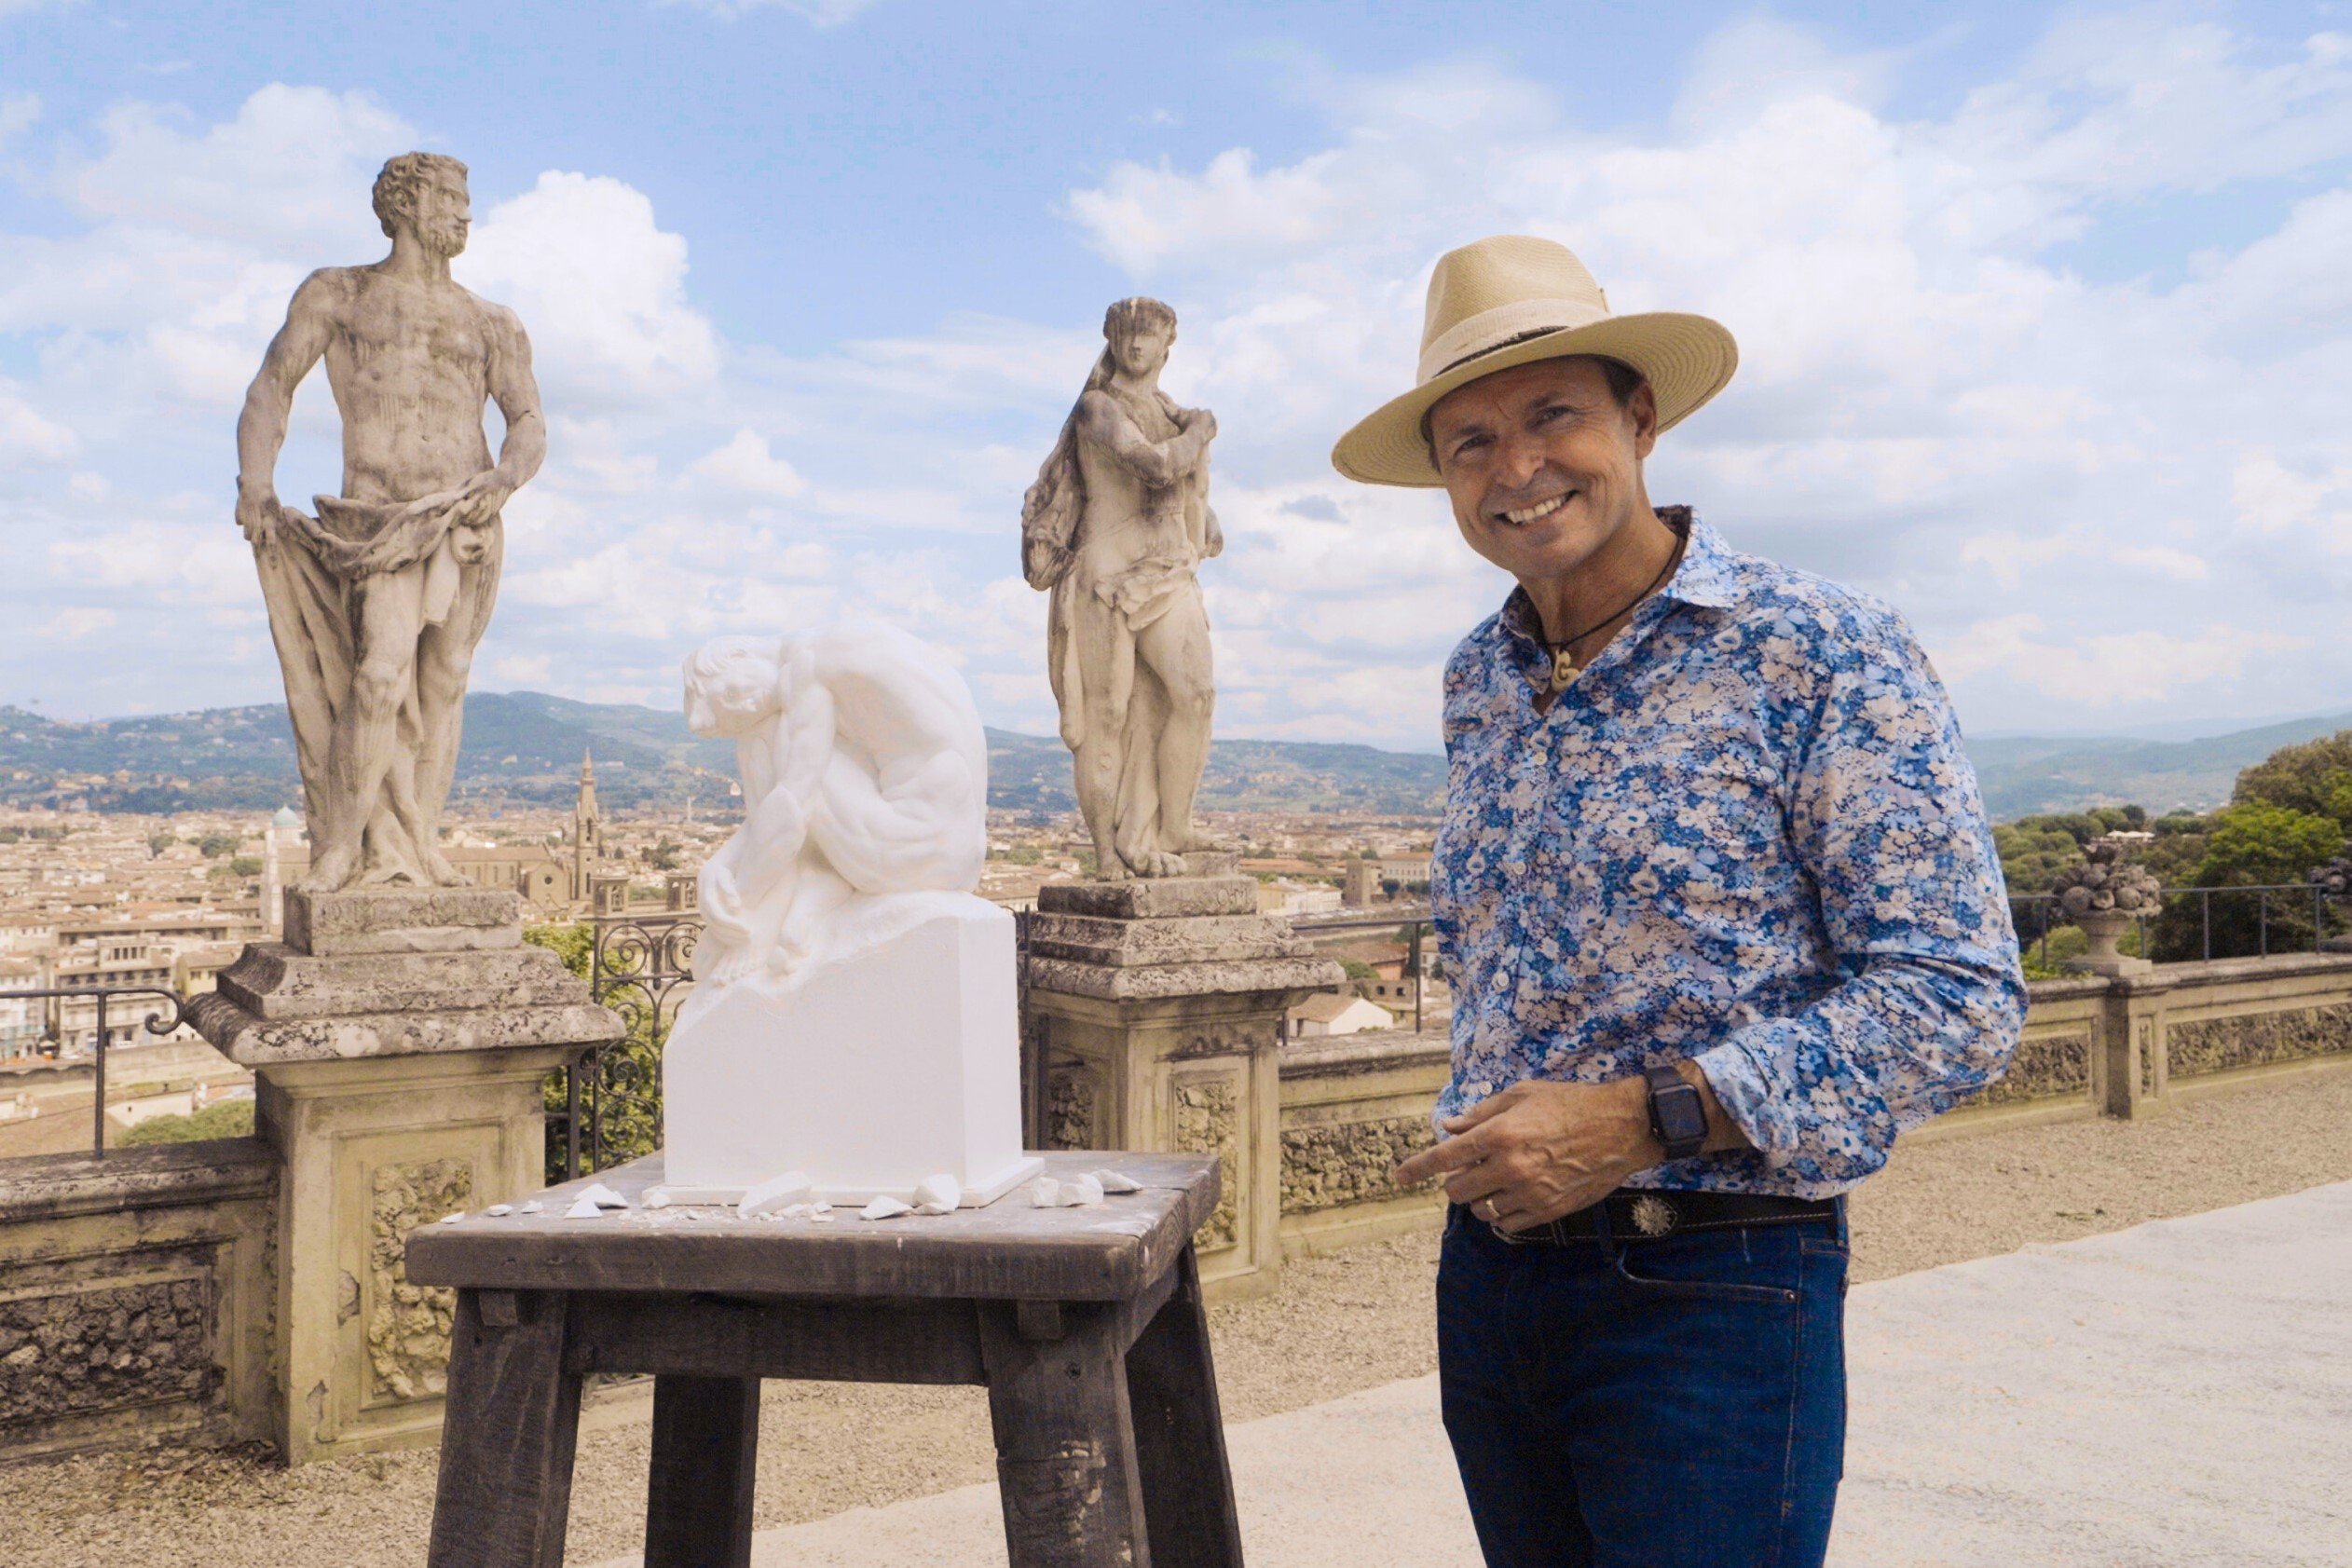 Phil Keoghan, who hosts 'The Amazing Race' Season 34 on CBS, wears a blue floral long-sleeved button-up shirt, jeans, and a tan hat while posing in front of statues in Italy.